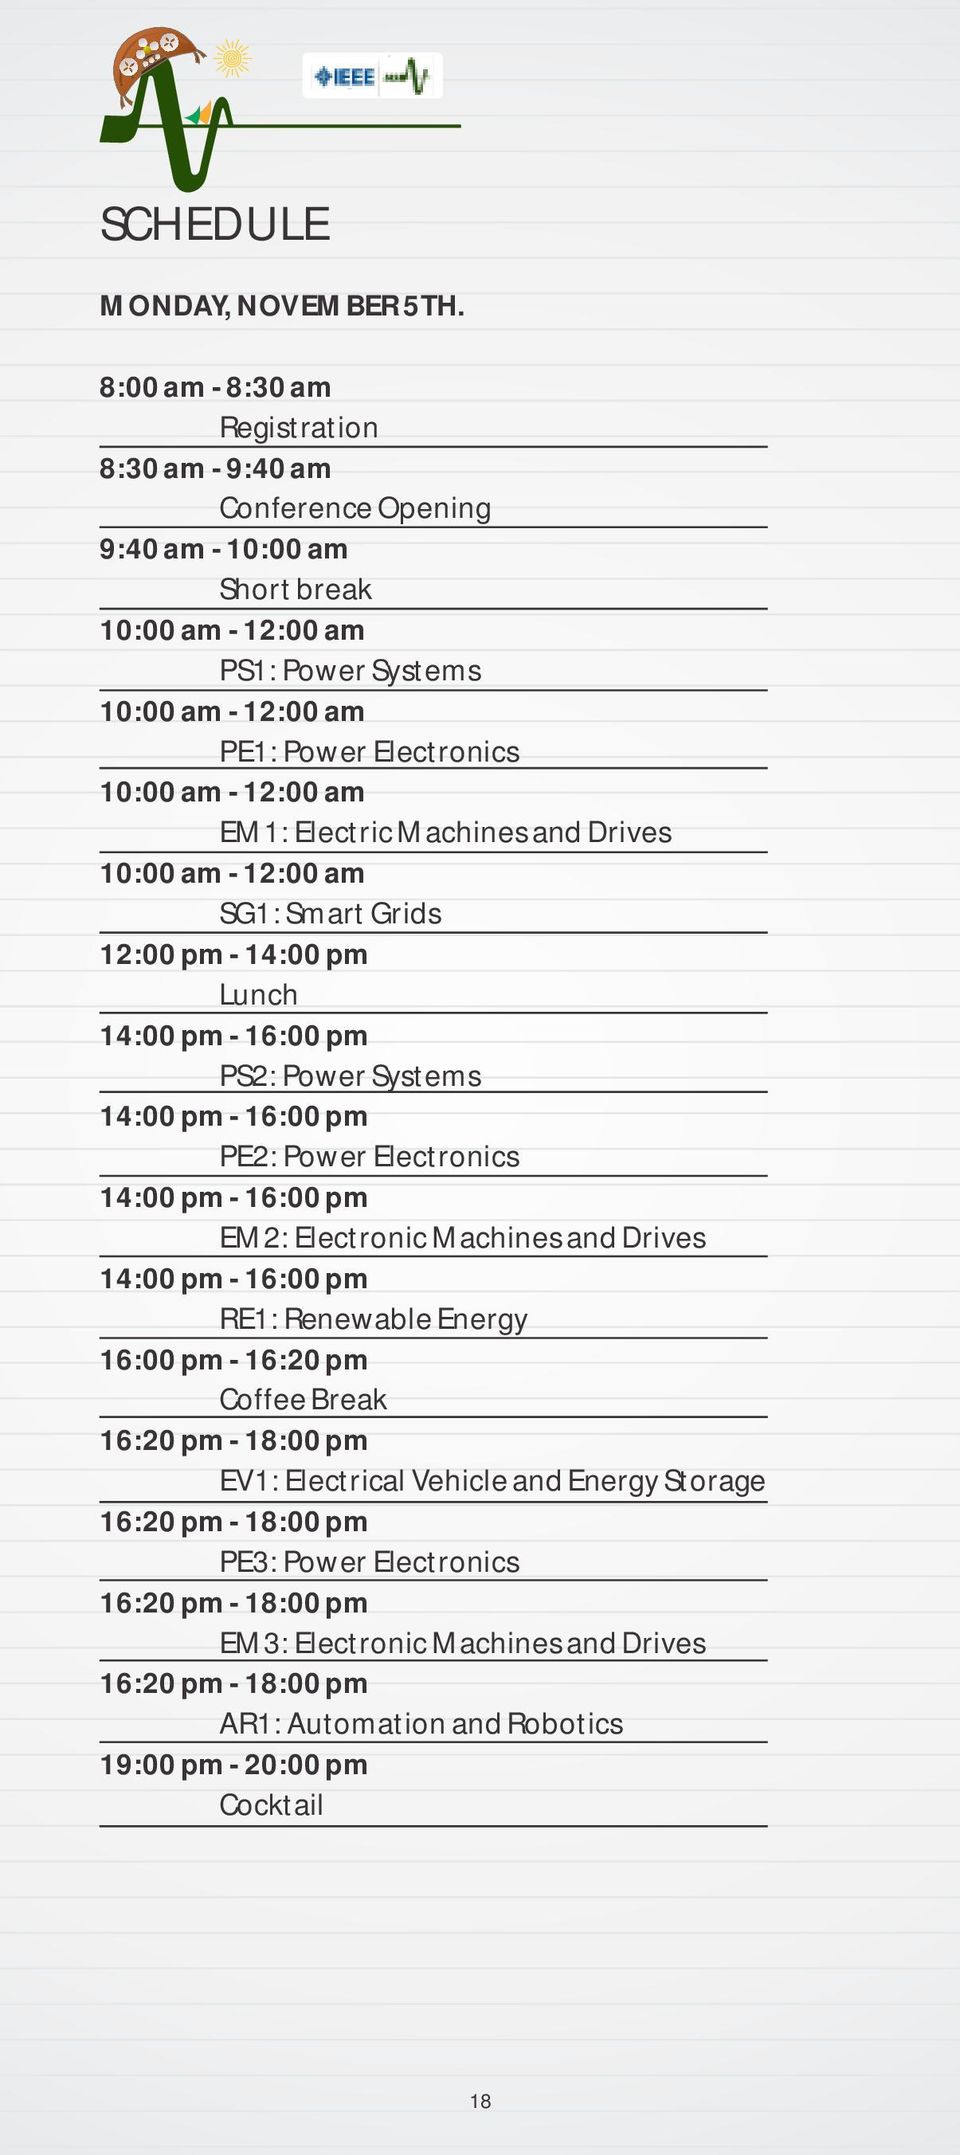 12:00 am EM1: Electric Machines and Drives 10:00 am - 12:00 am SG1: Smart Grids 12:00 pm - 14:00 pm Lunch 14:00 pm - 16:00 pm PS2: Power Systems 14:00 pm - 16:00 pm PE2: Power Electronics 14:00